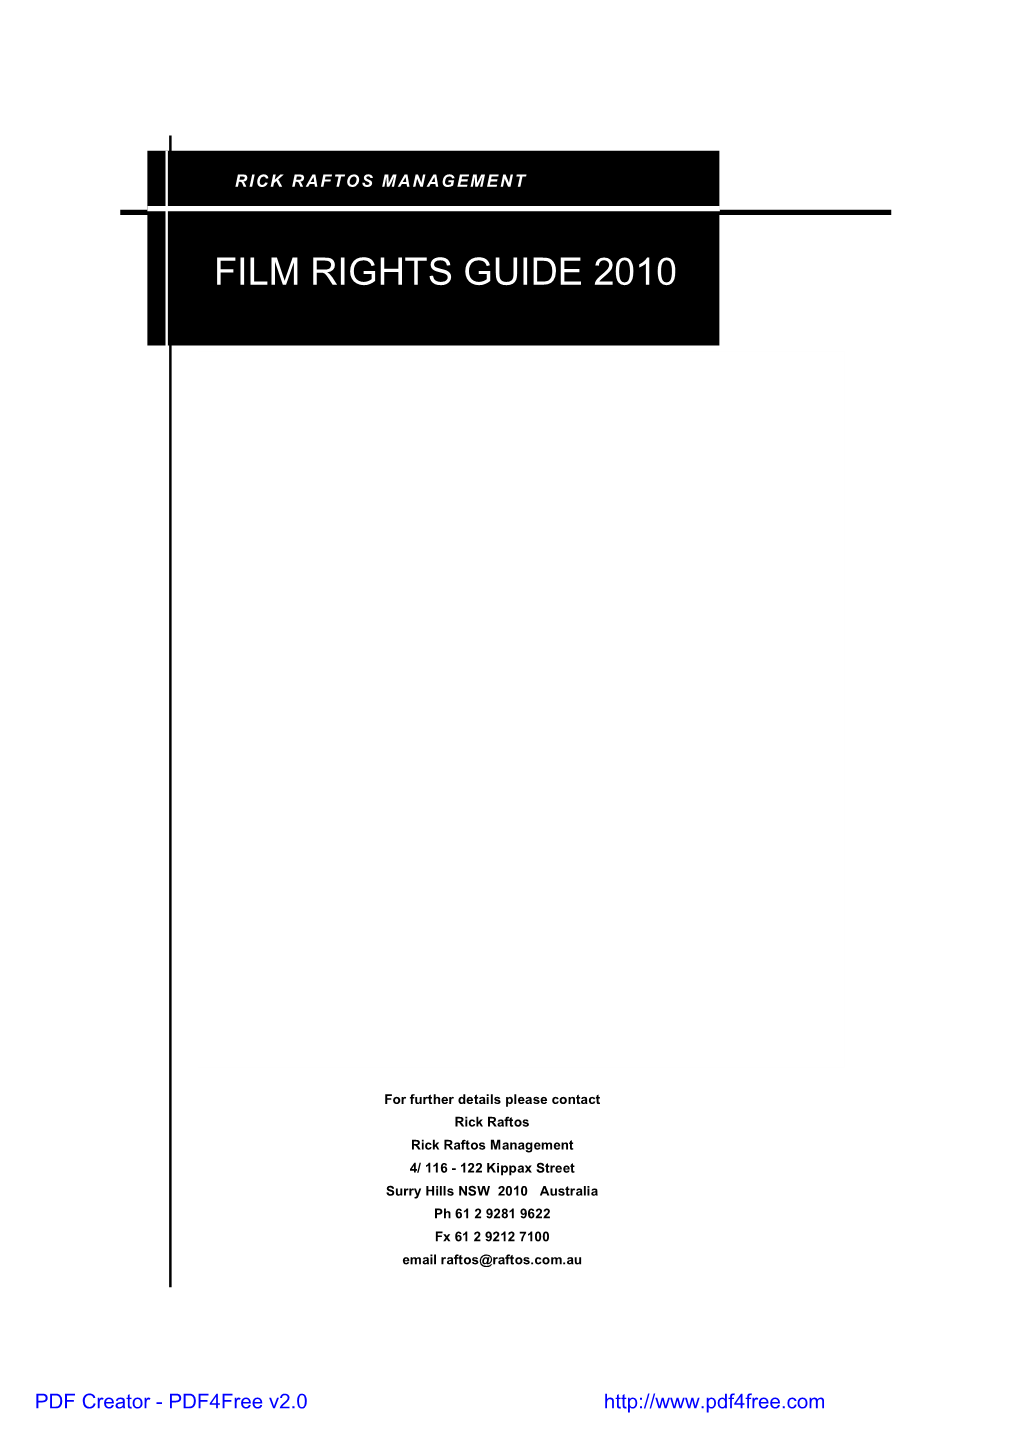 Books to Film Rights Guide 2009